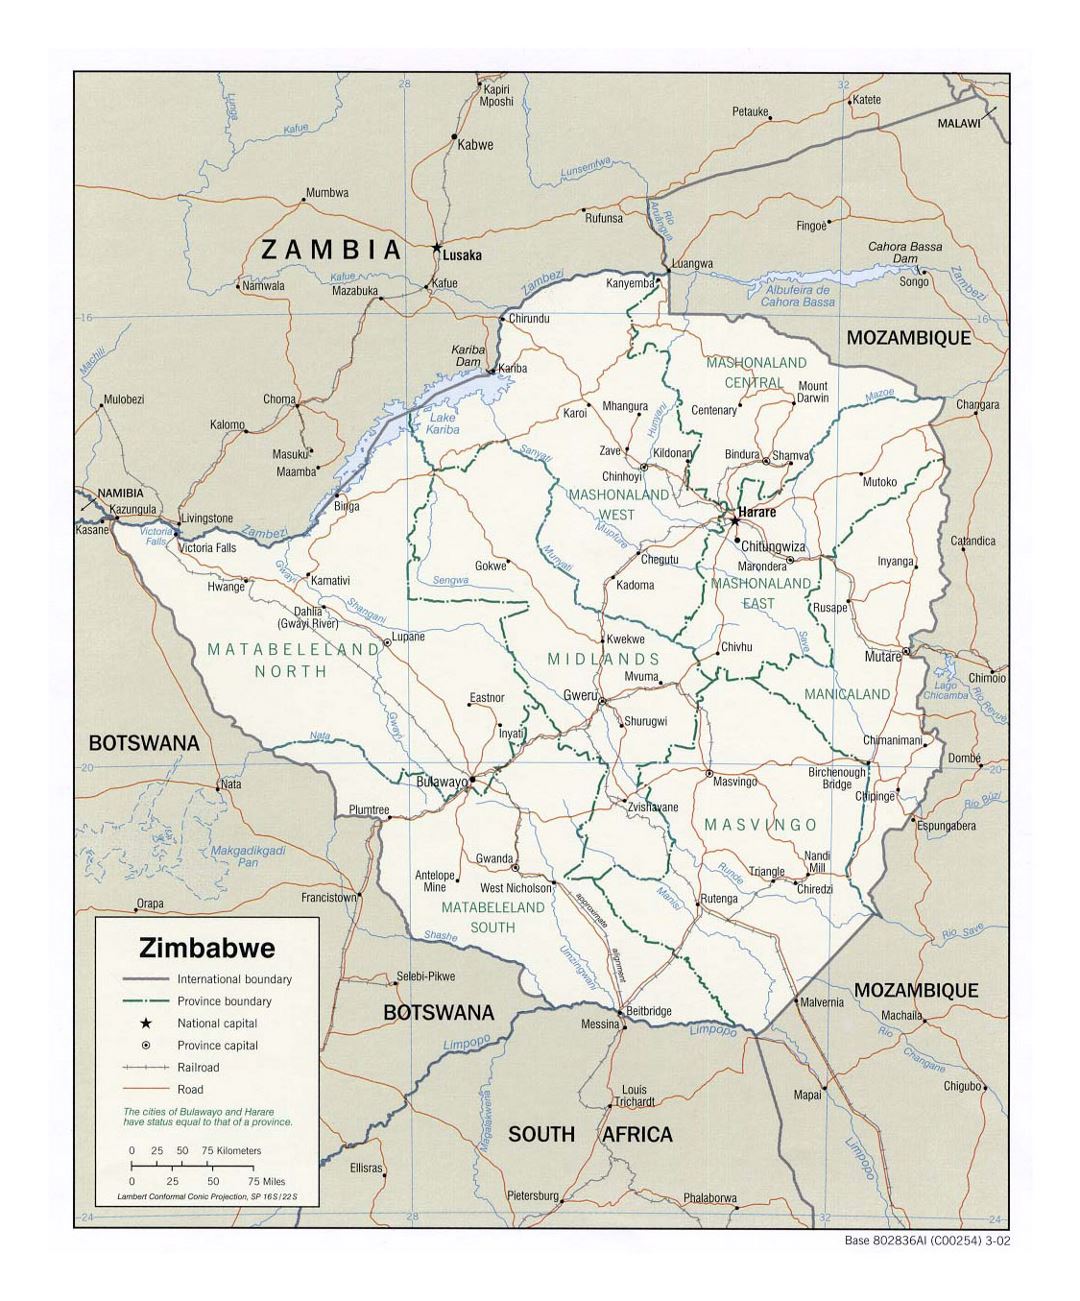 Detailed political and administrative map of Zimbabwe with roads, railroads and major cities - 2002